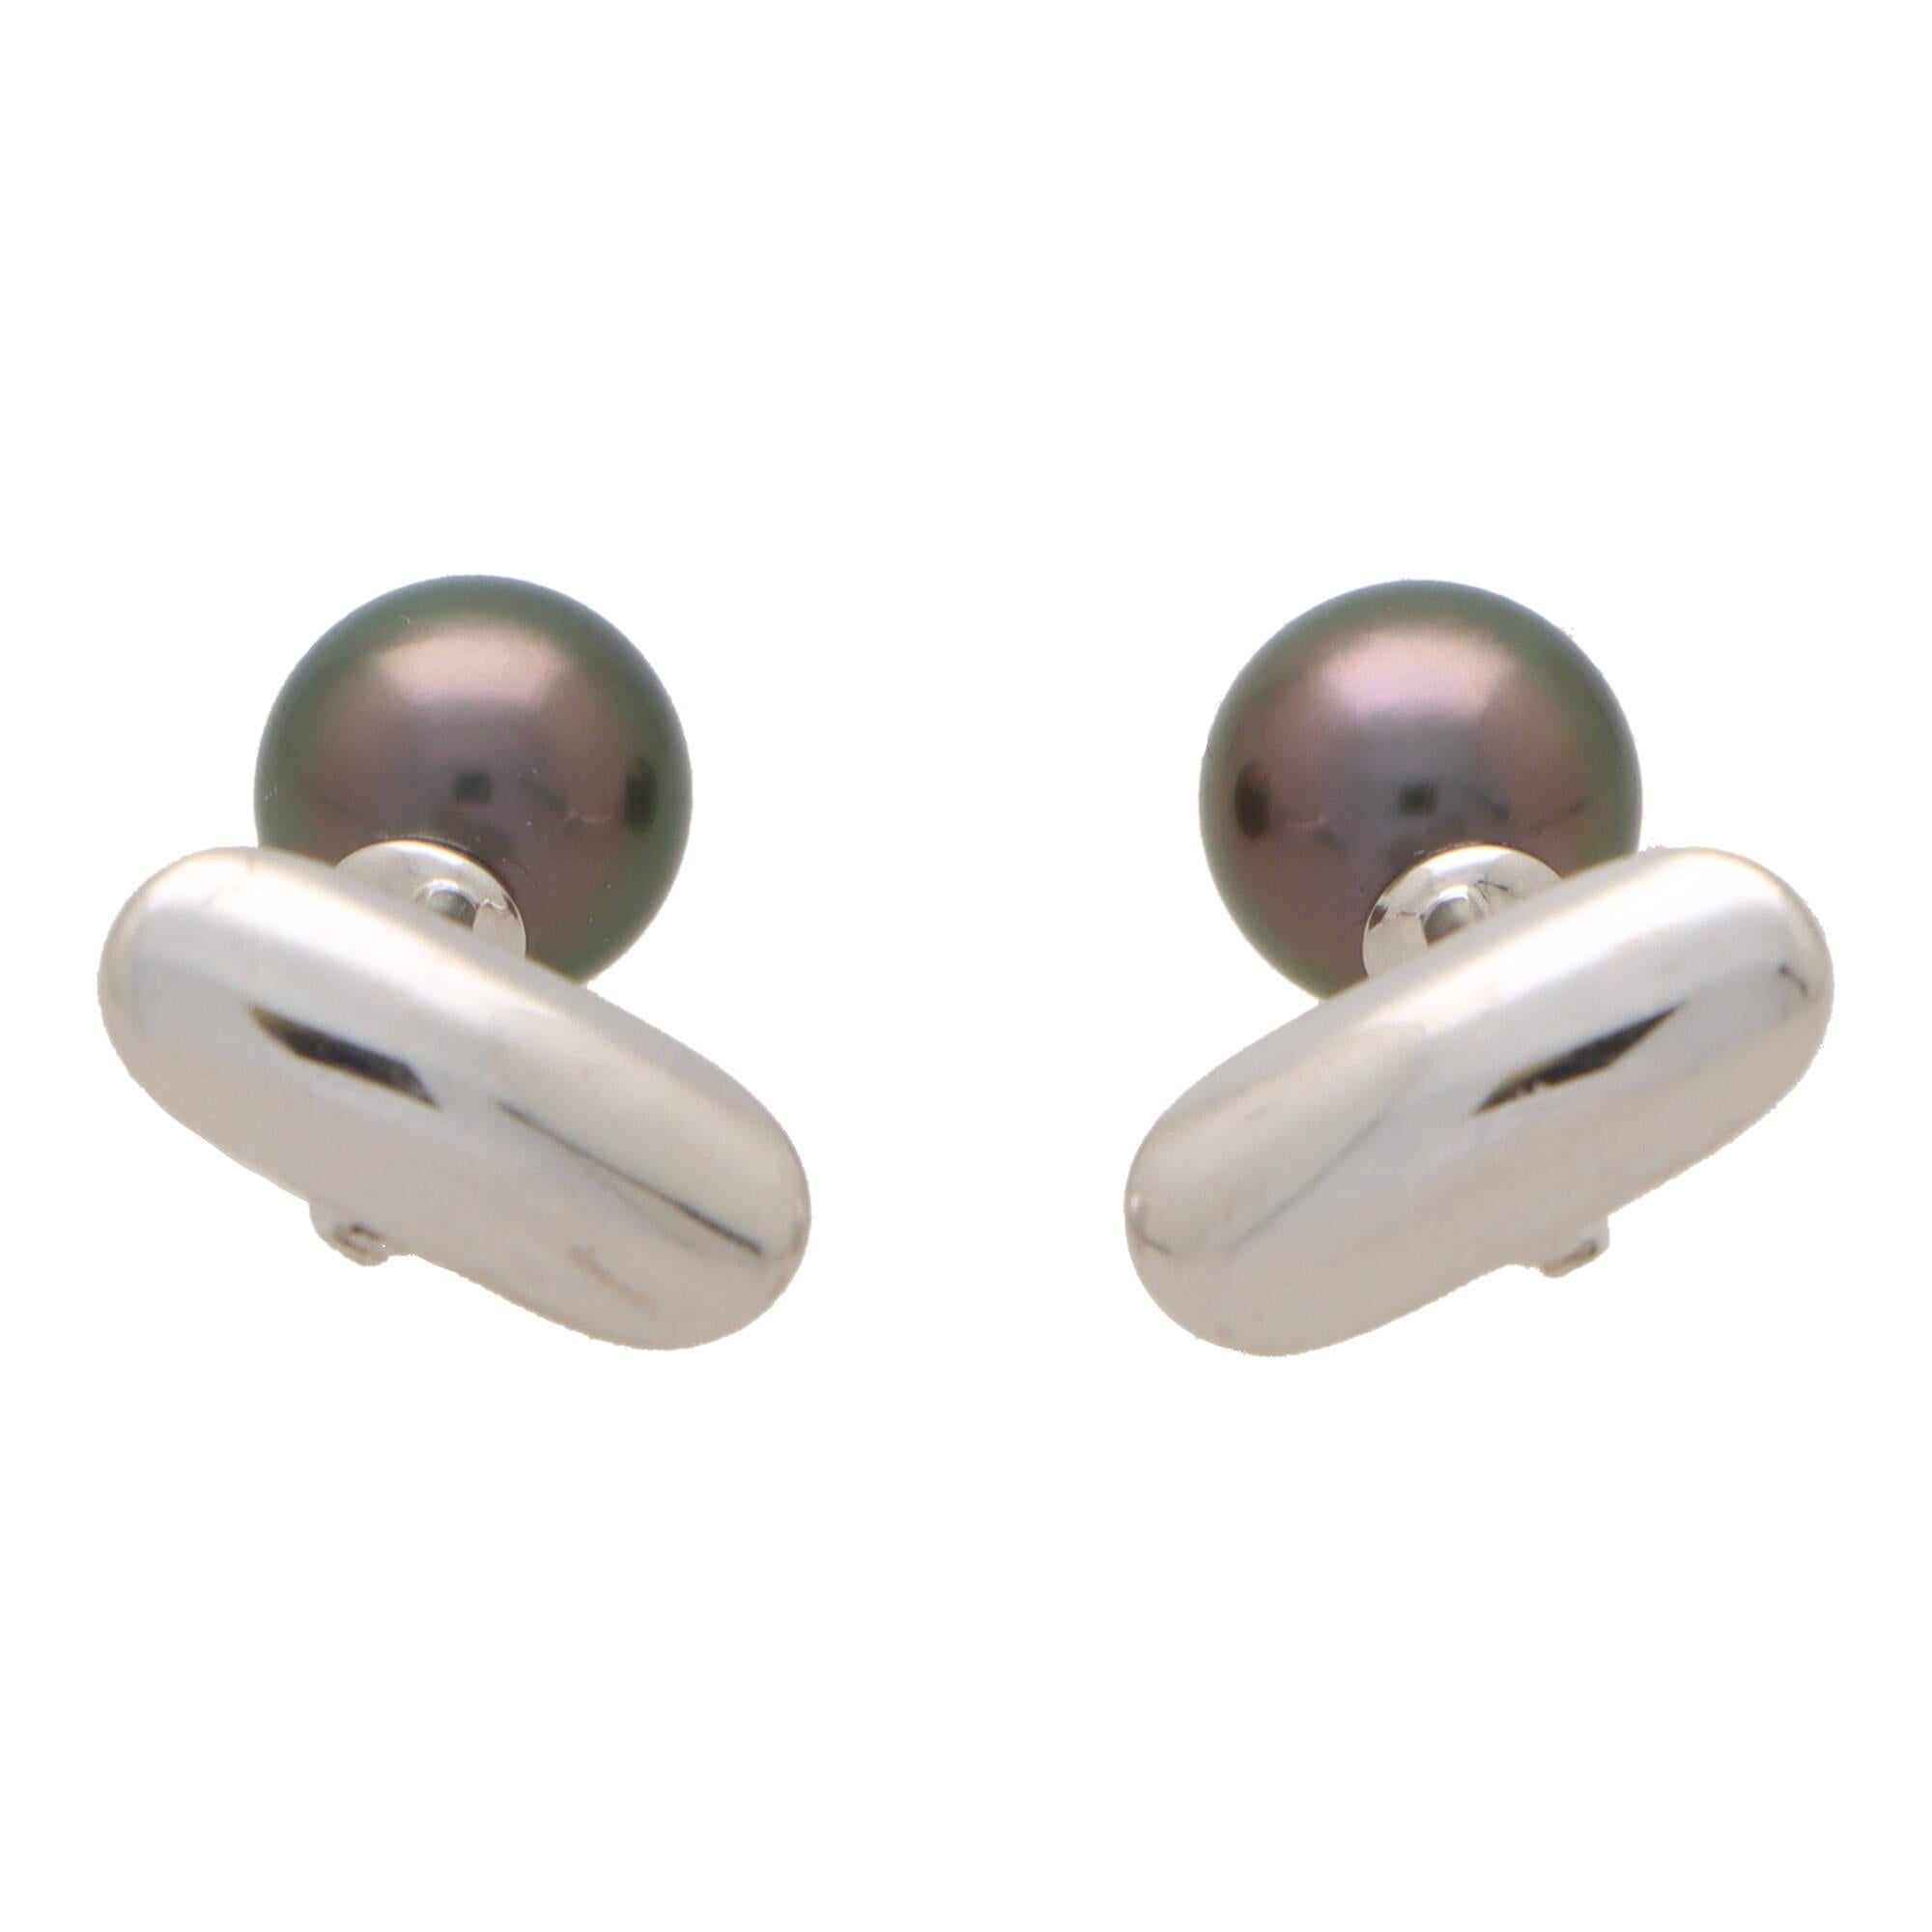 A unique pair of vintage Mikimoto Tahitian pearl swivel back cufflinks set in 18k white gold.

From a now discontinued collection, each cufflink is composed of a lustrous black Tahitian pearl. The pearl is secured to a bar fitting with a white gold